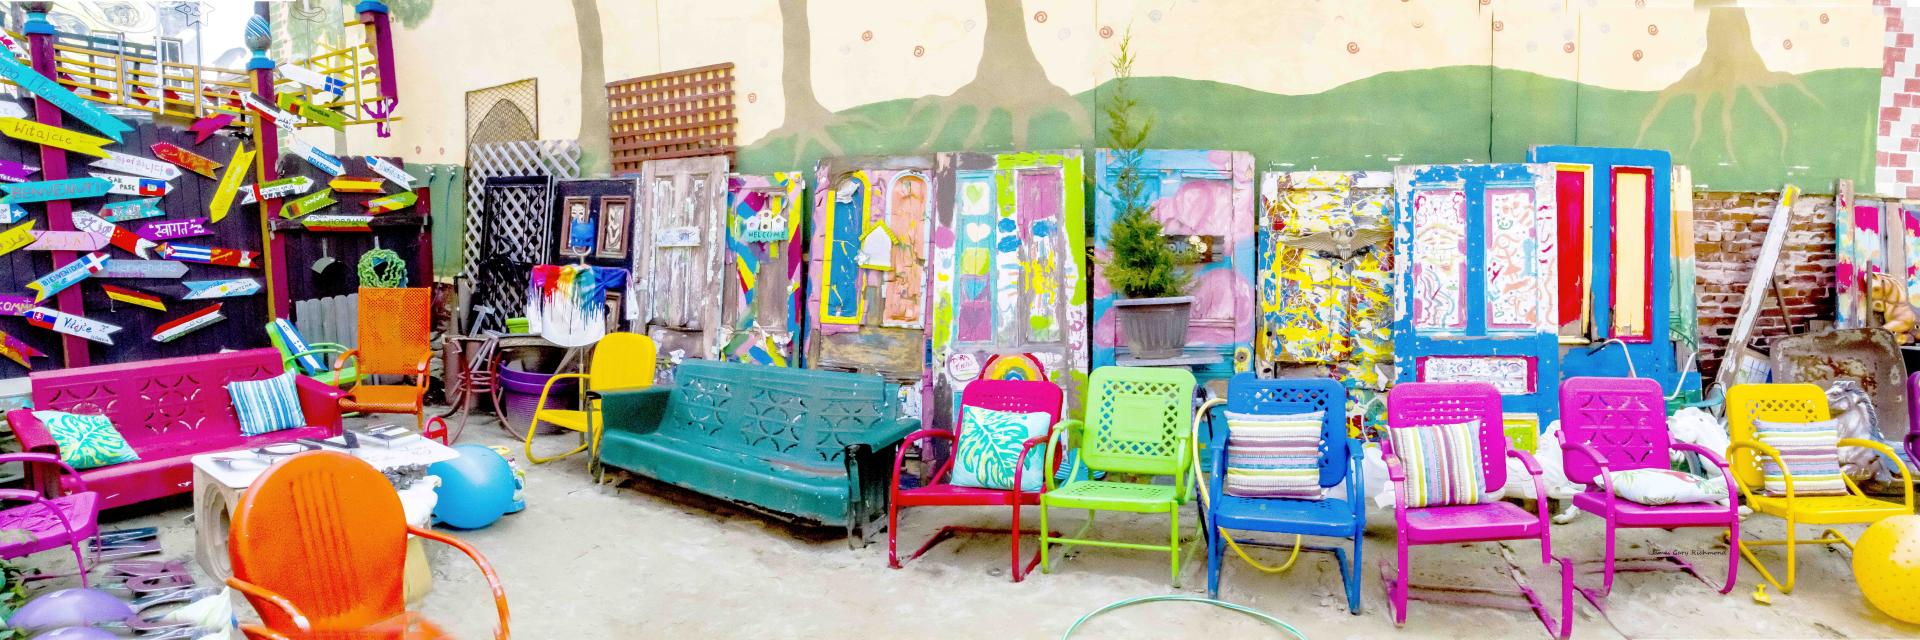 53068p architecture, randyland, chairs, color,, .jpg